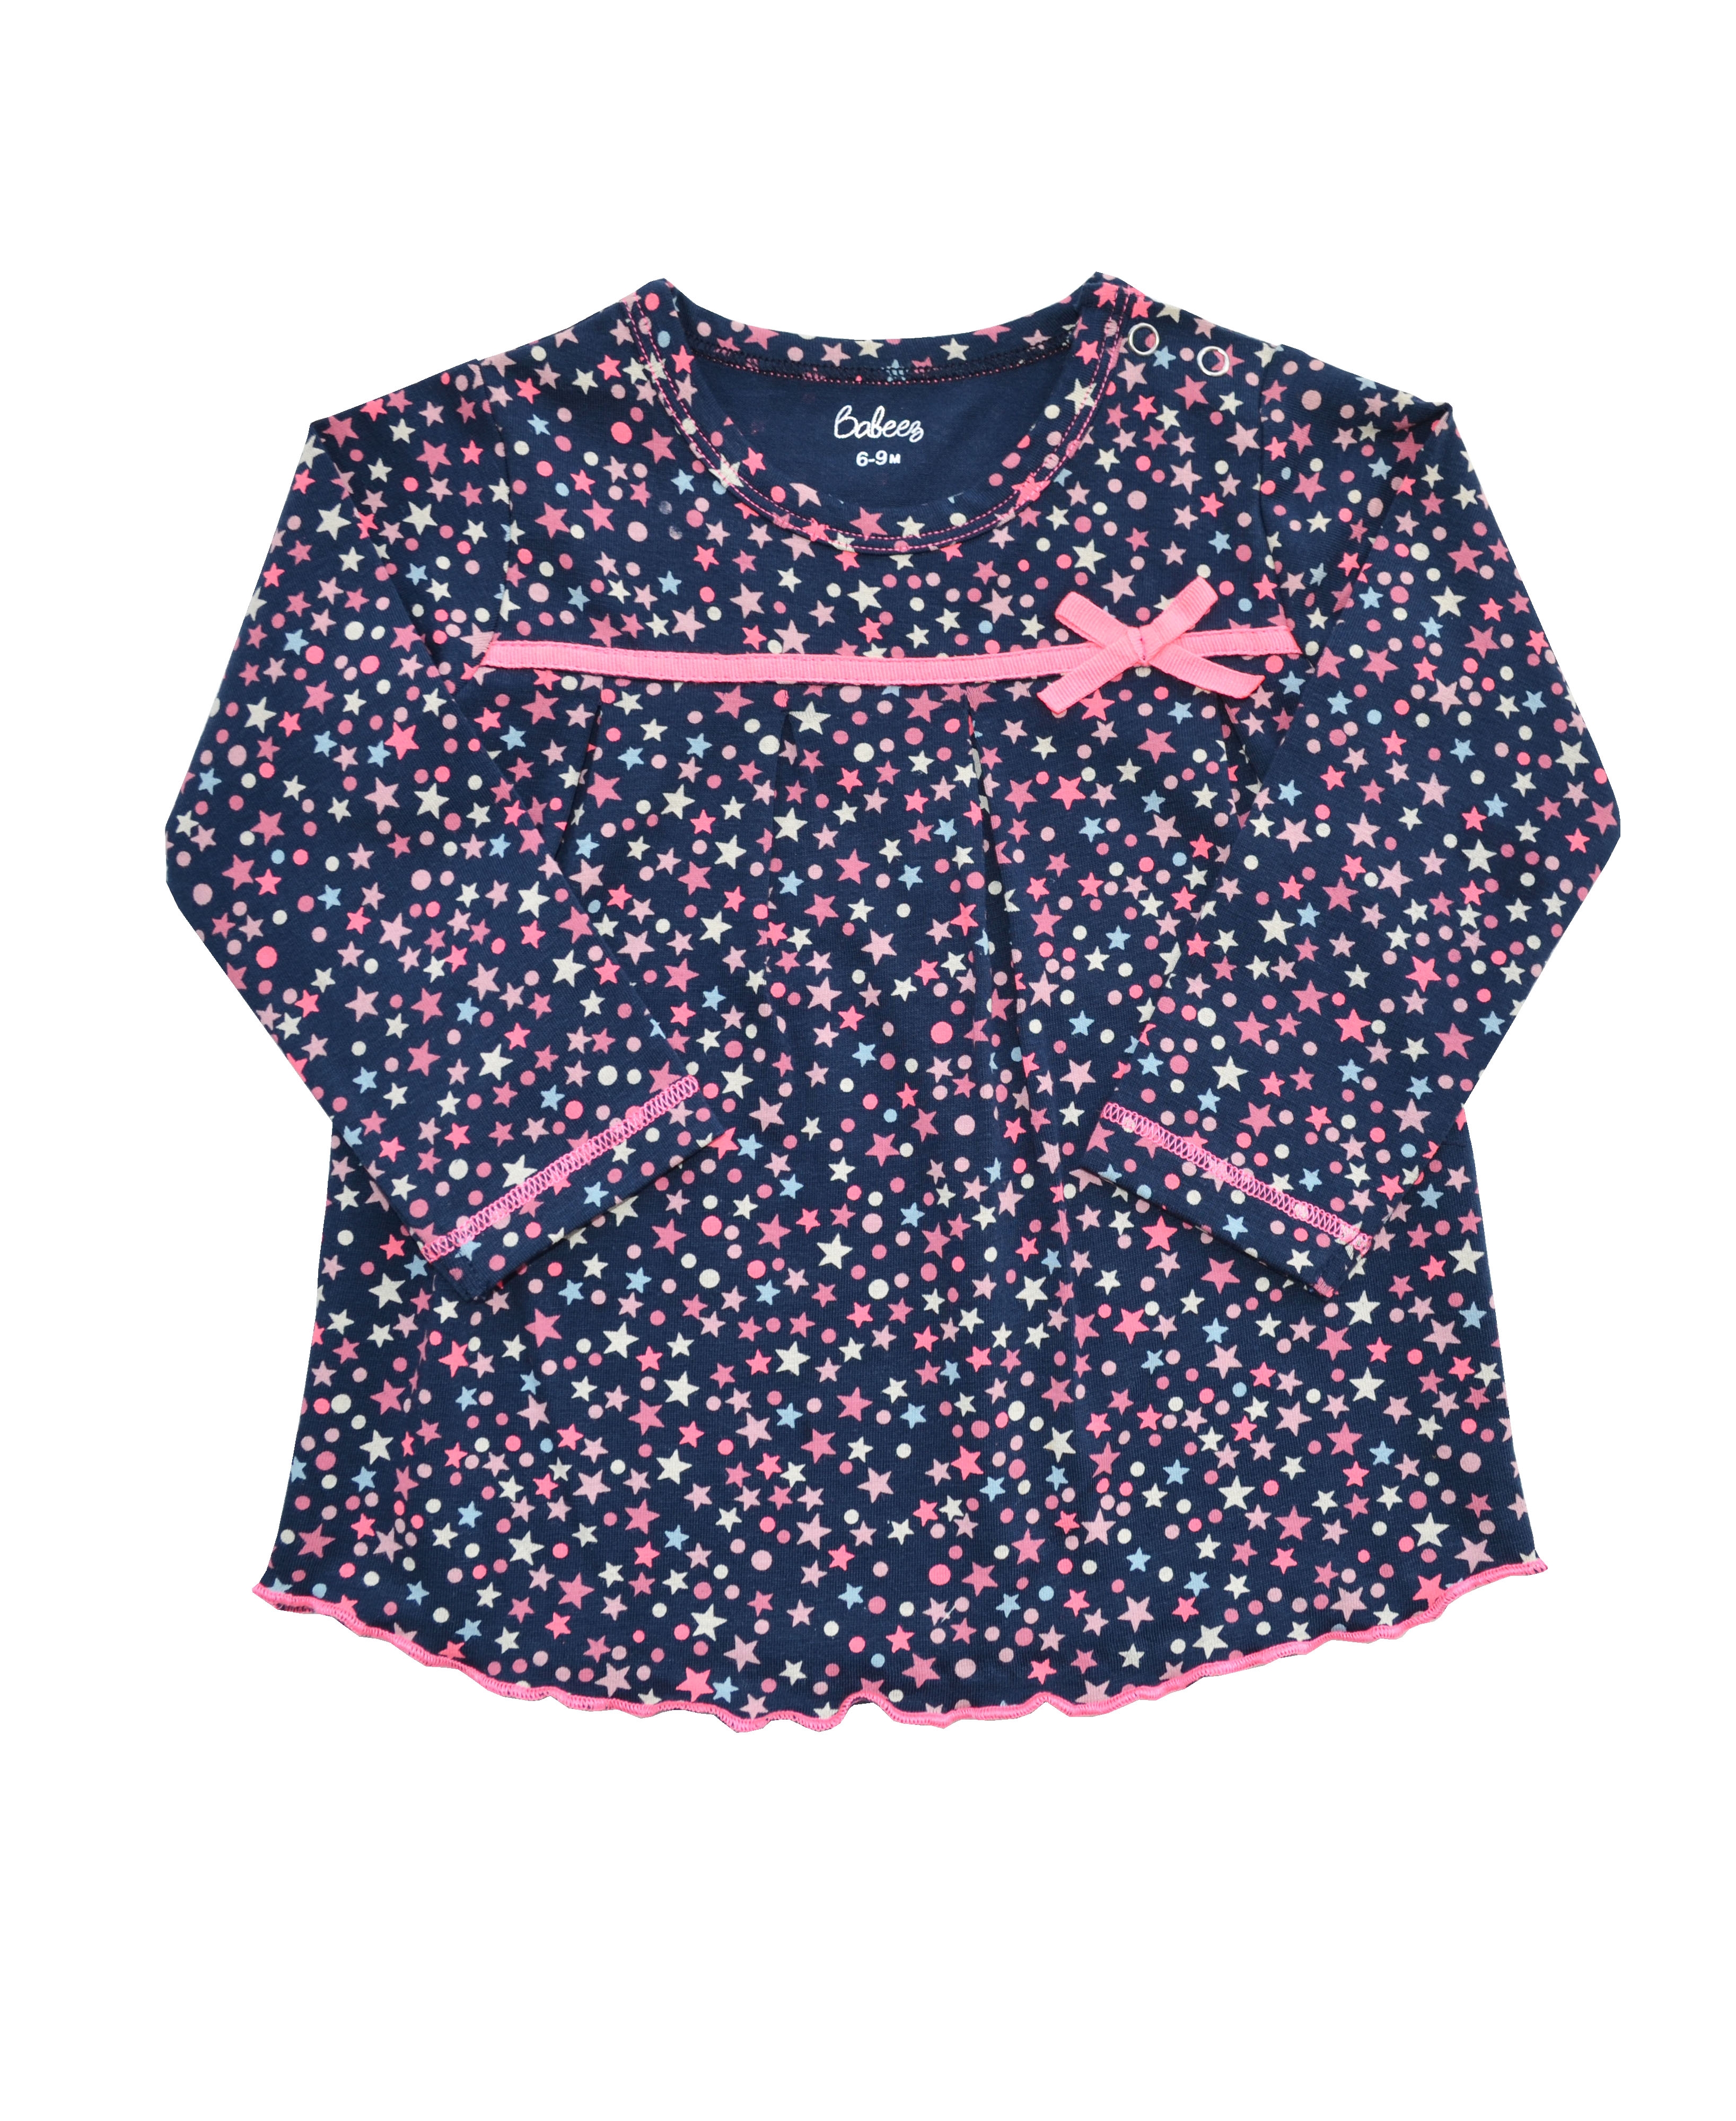 Babeez | Allover Star Print on Navy Long Sleeves Top (95% Cotton 5% Elasthan Jersey) undefined